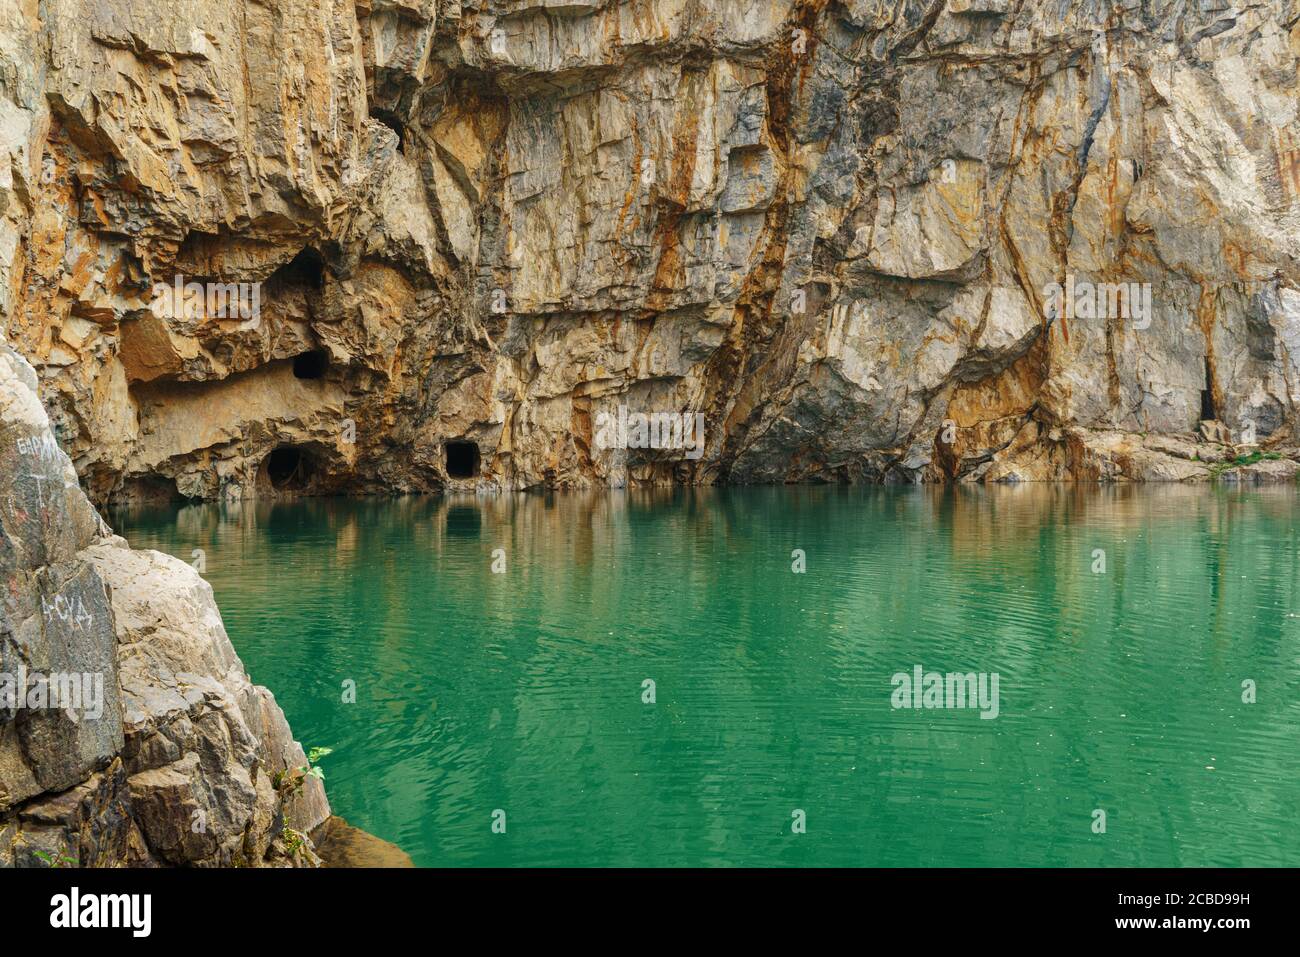 A green-colored lake and a rocky cliff with holes in abandoned adits. Tuim is a sinkhole at the site of an abandoned copper and tungsten ore mine. Stock Photo